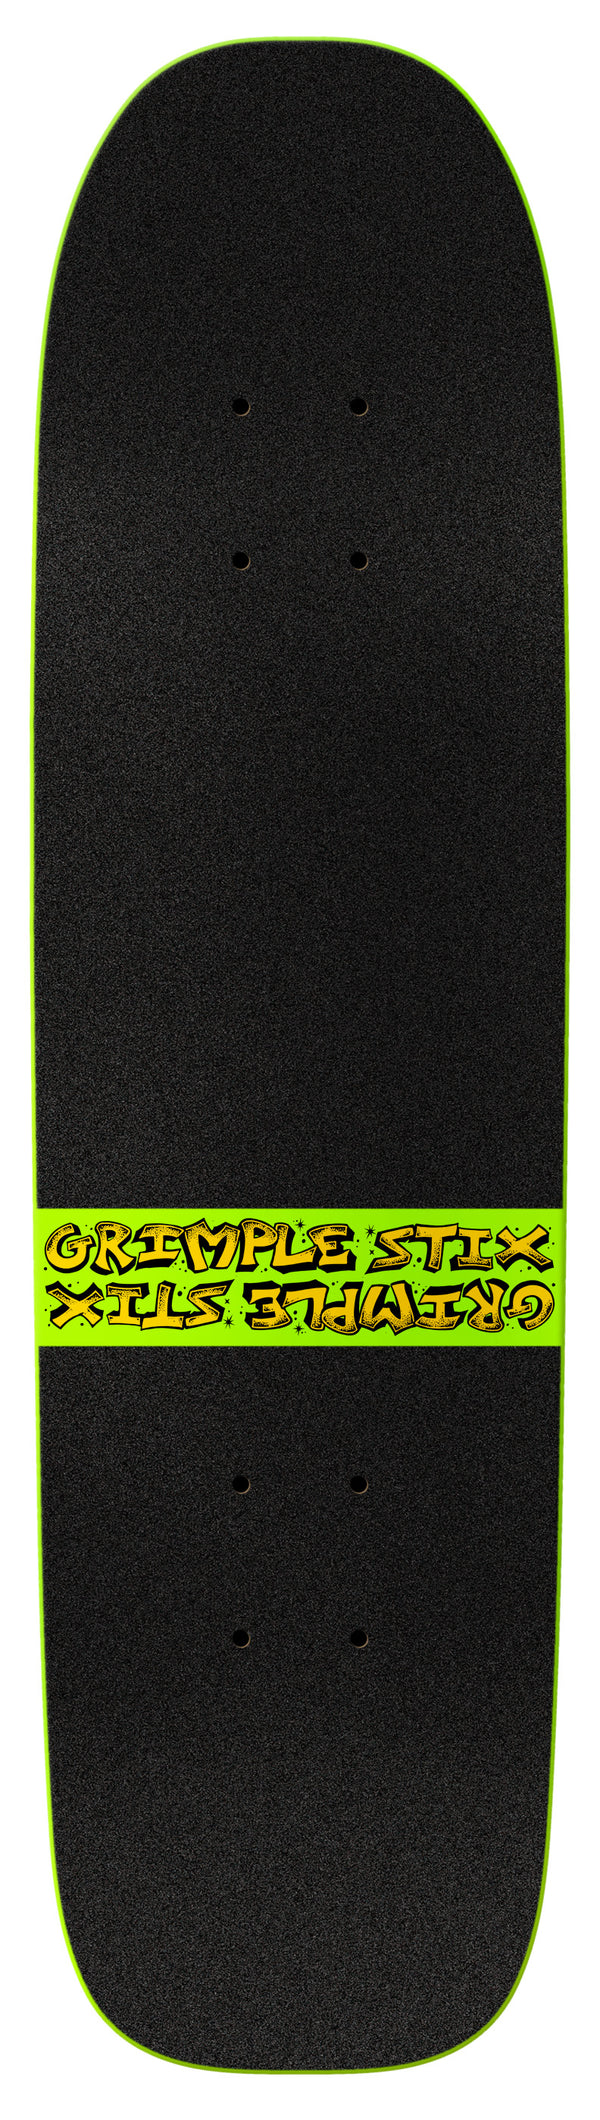 An Anti Hero Grimple Stix Spacewalker Complete skateboard with a neon yellow line on it.